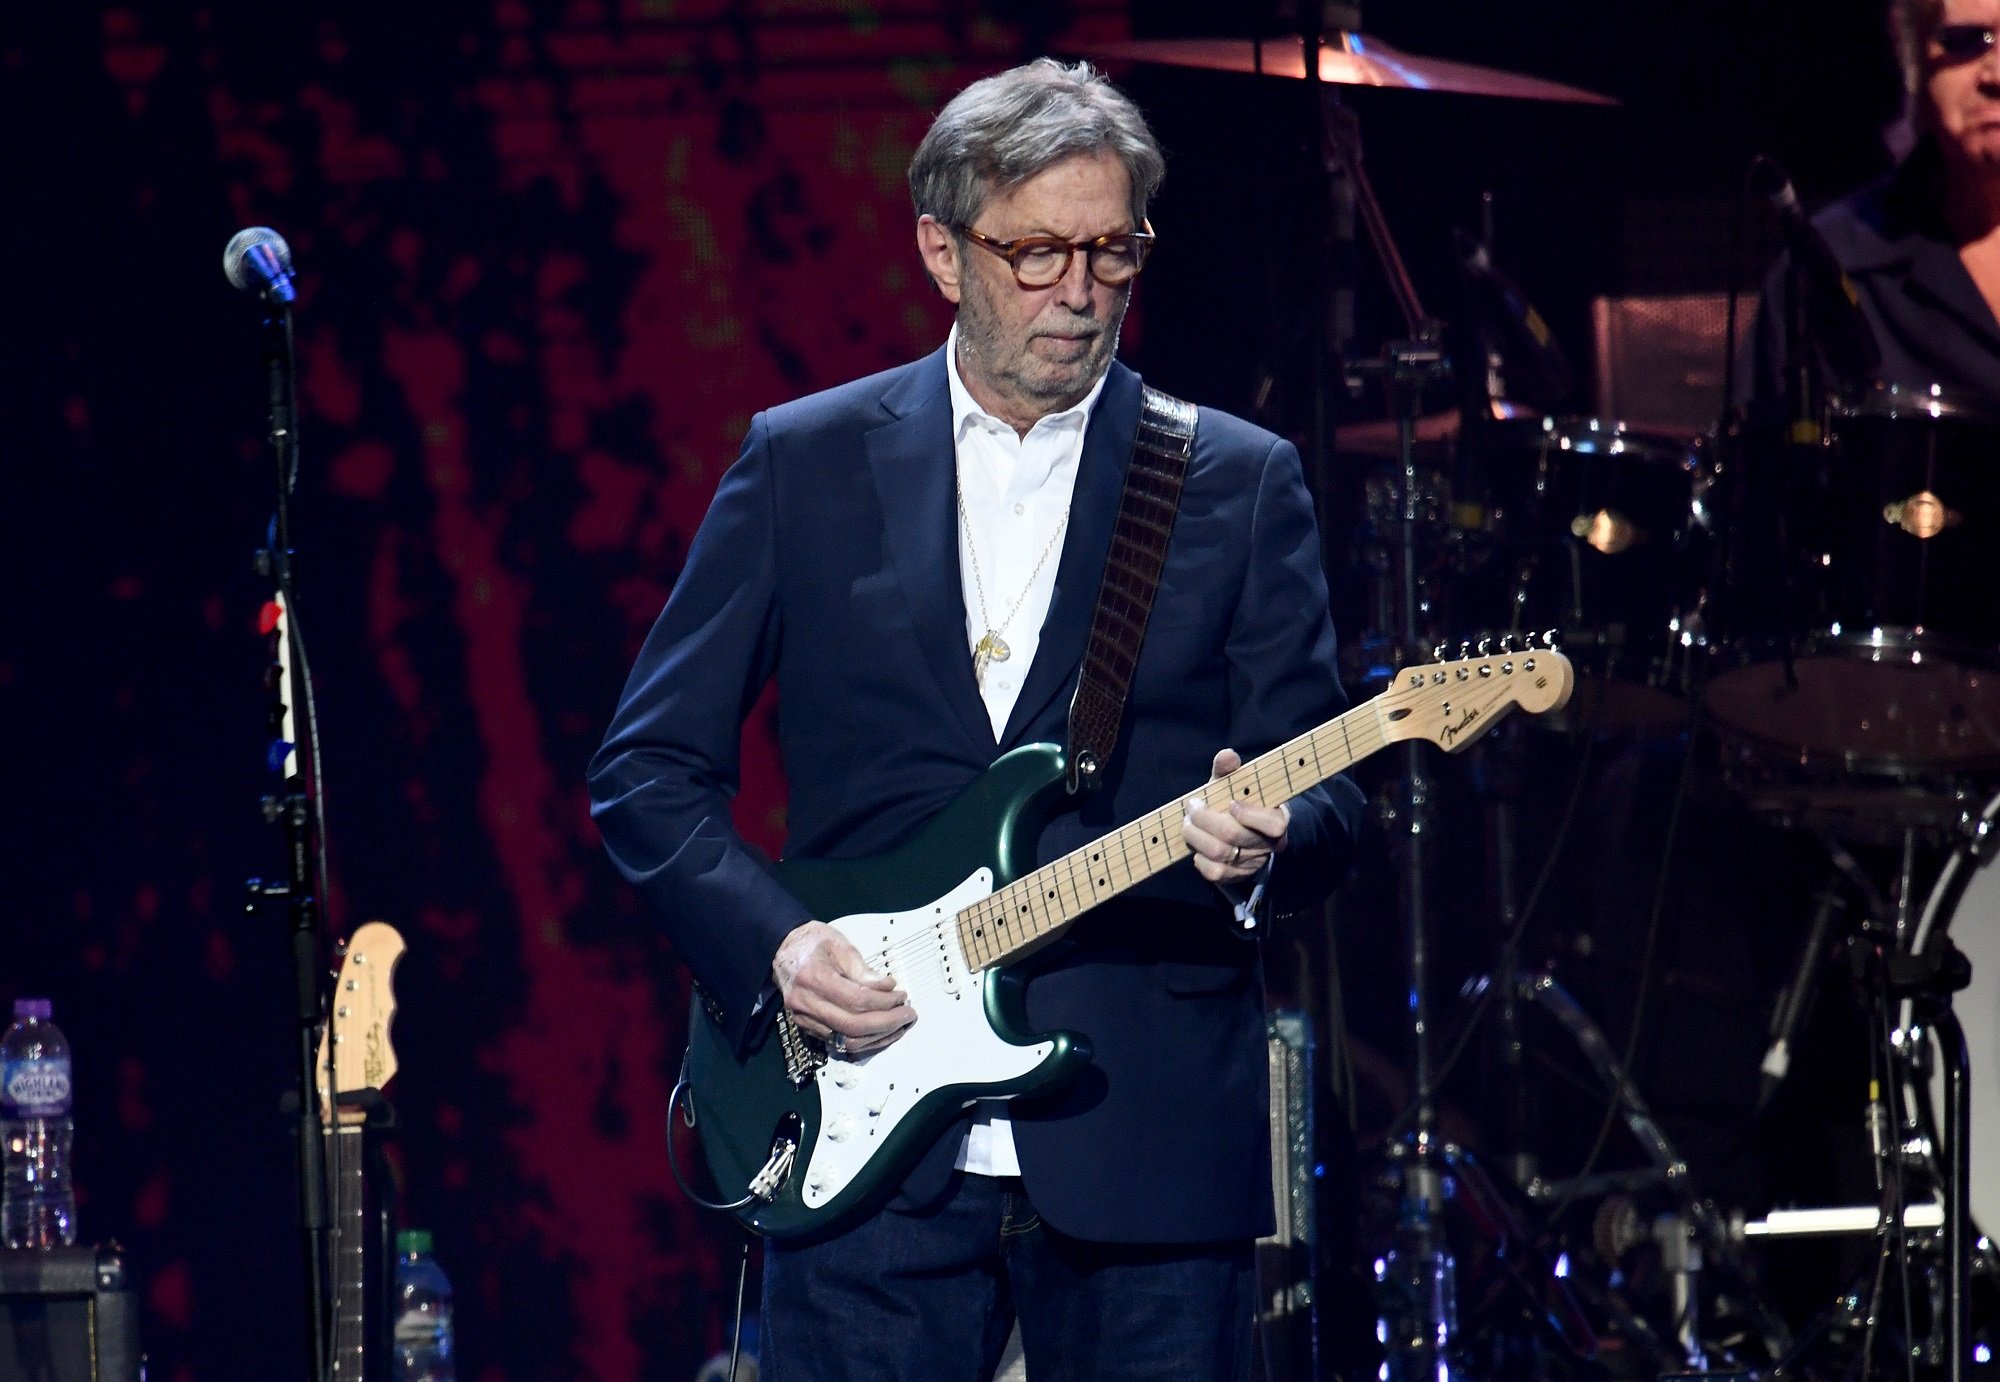 Eric Clapton plays guitar onstage while wearing a blue suit